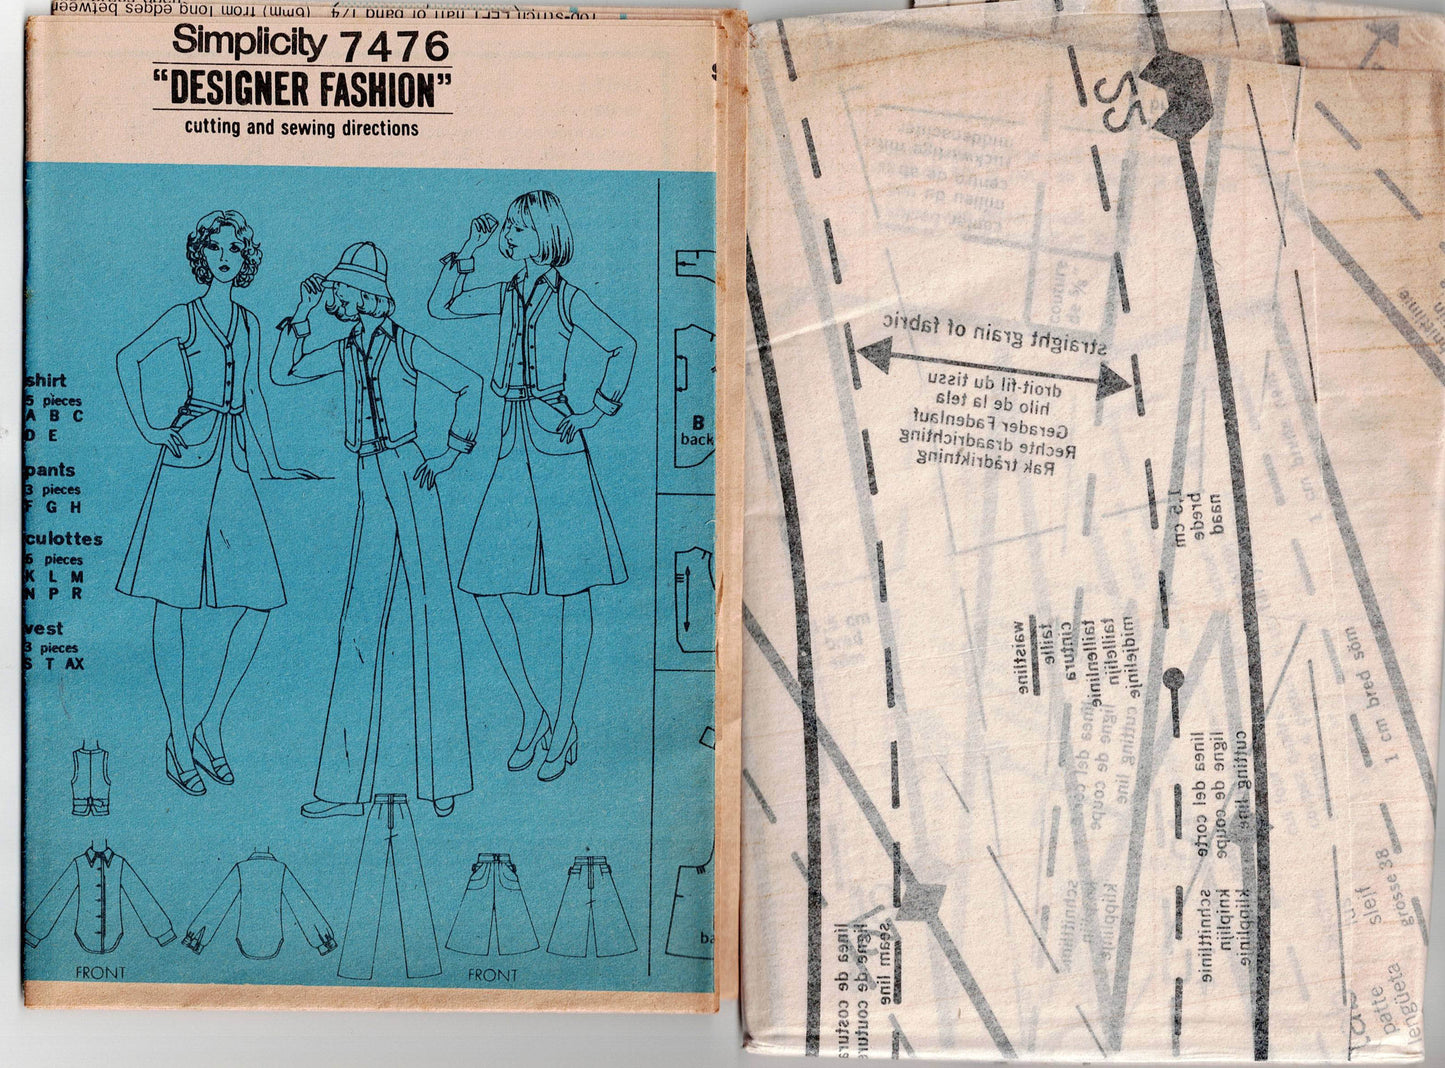 Simplicity 7476 Womens DESIGNER Wide Collared Shirt Vest Culottes & Pants 1970s Vintage Sewing Pattern Size 12 Bust 34 inches UNCUT Factory Folded